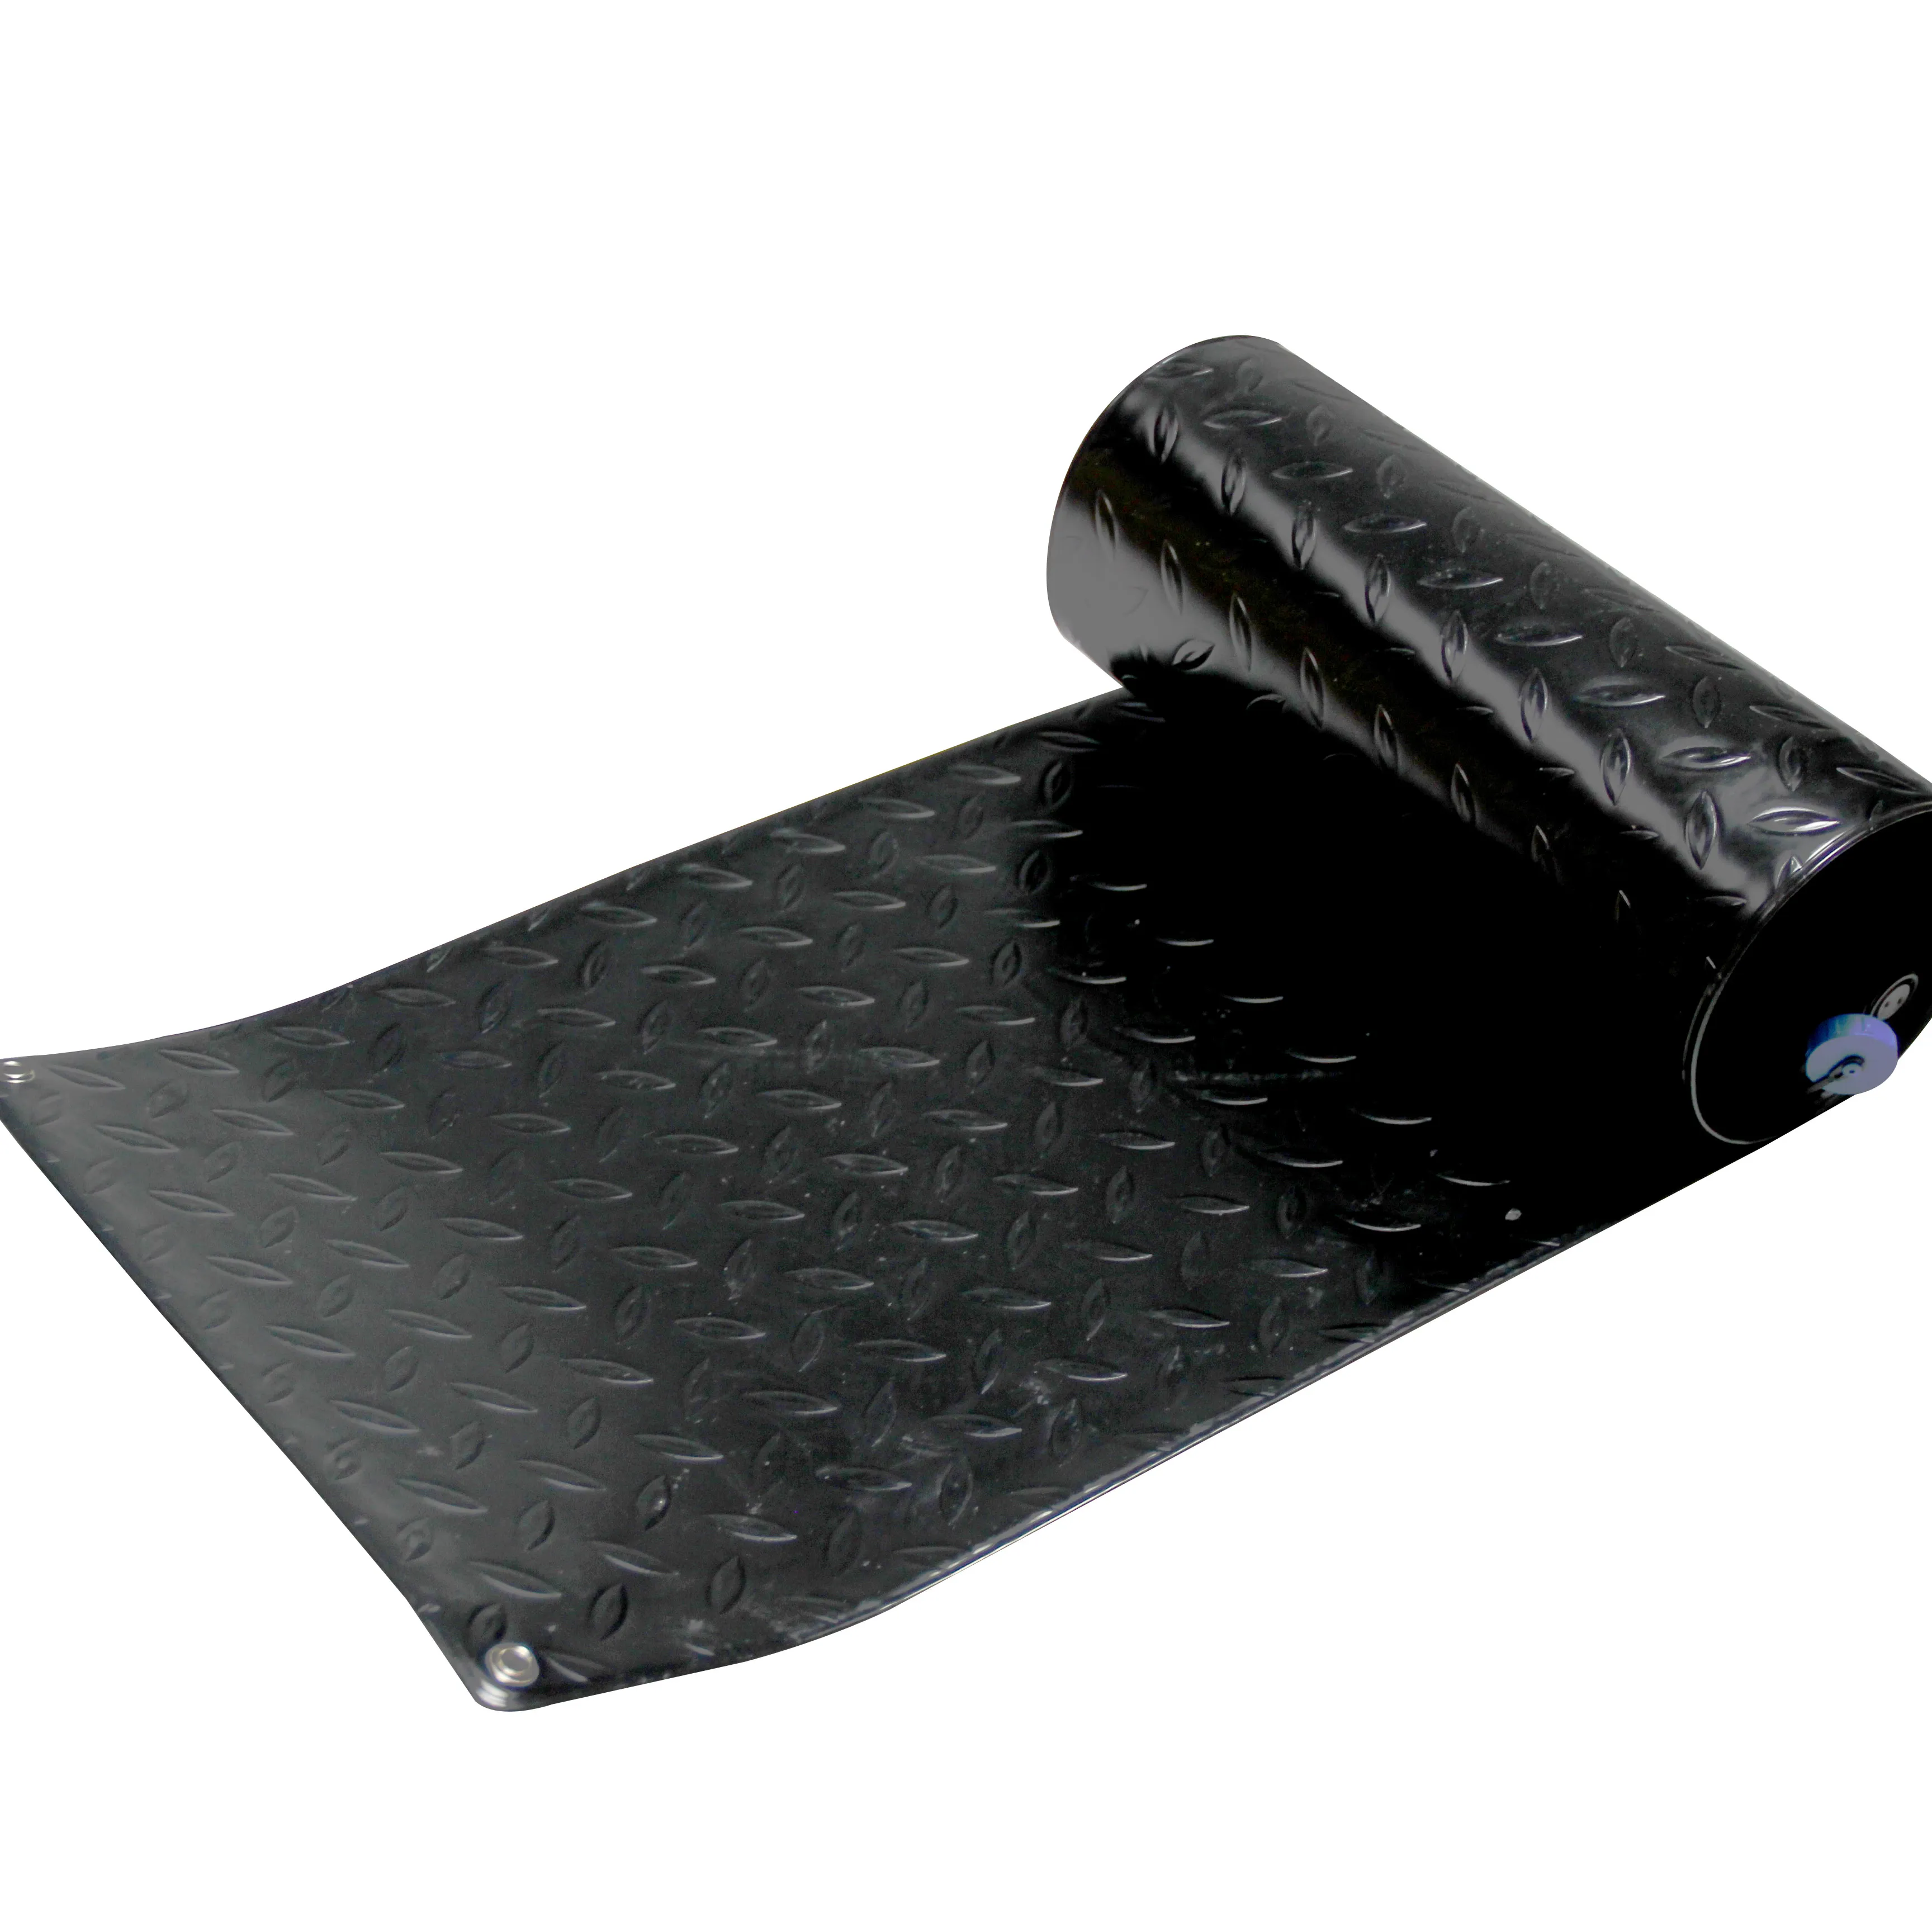 Brand new easy carpet mats for terrarium hydronic radiant roof heating snow melt with low price